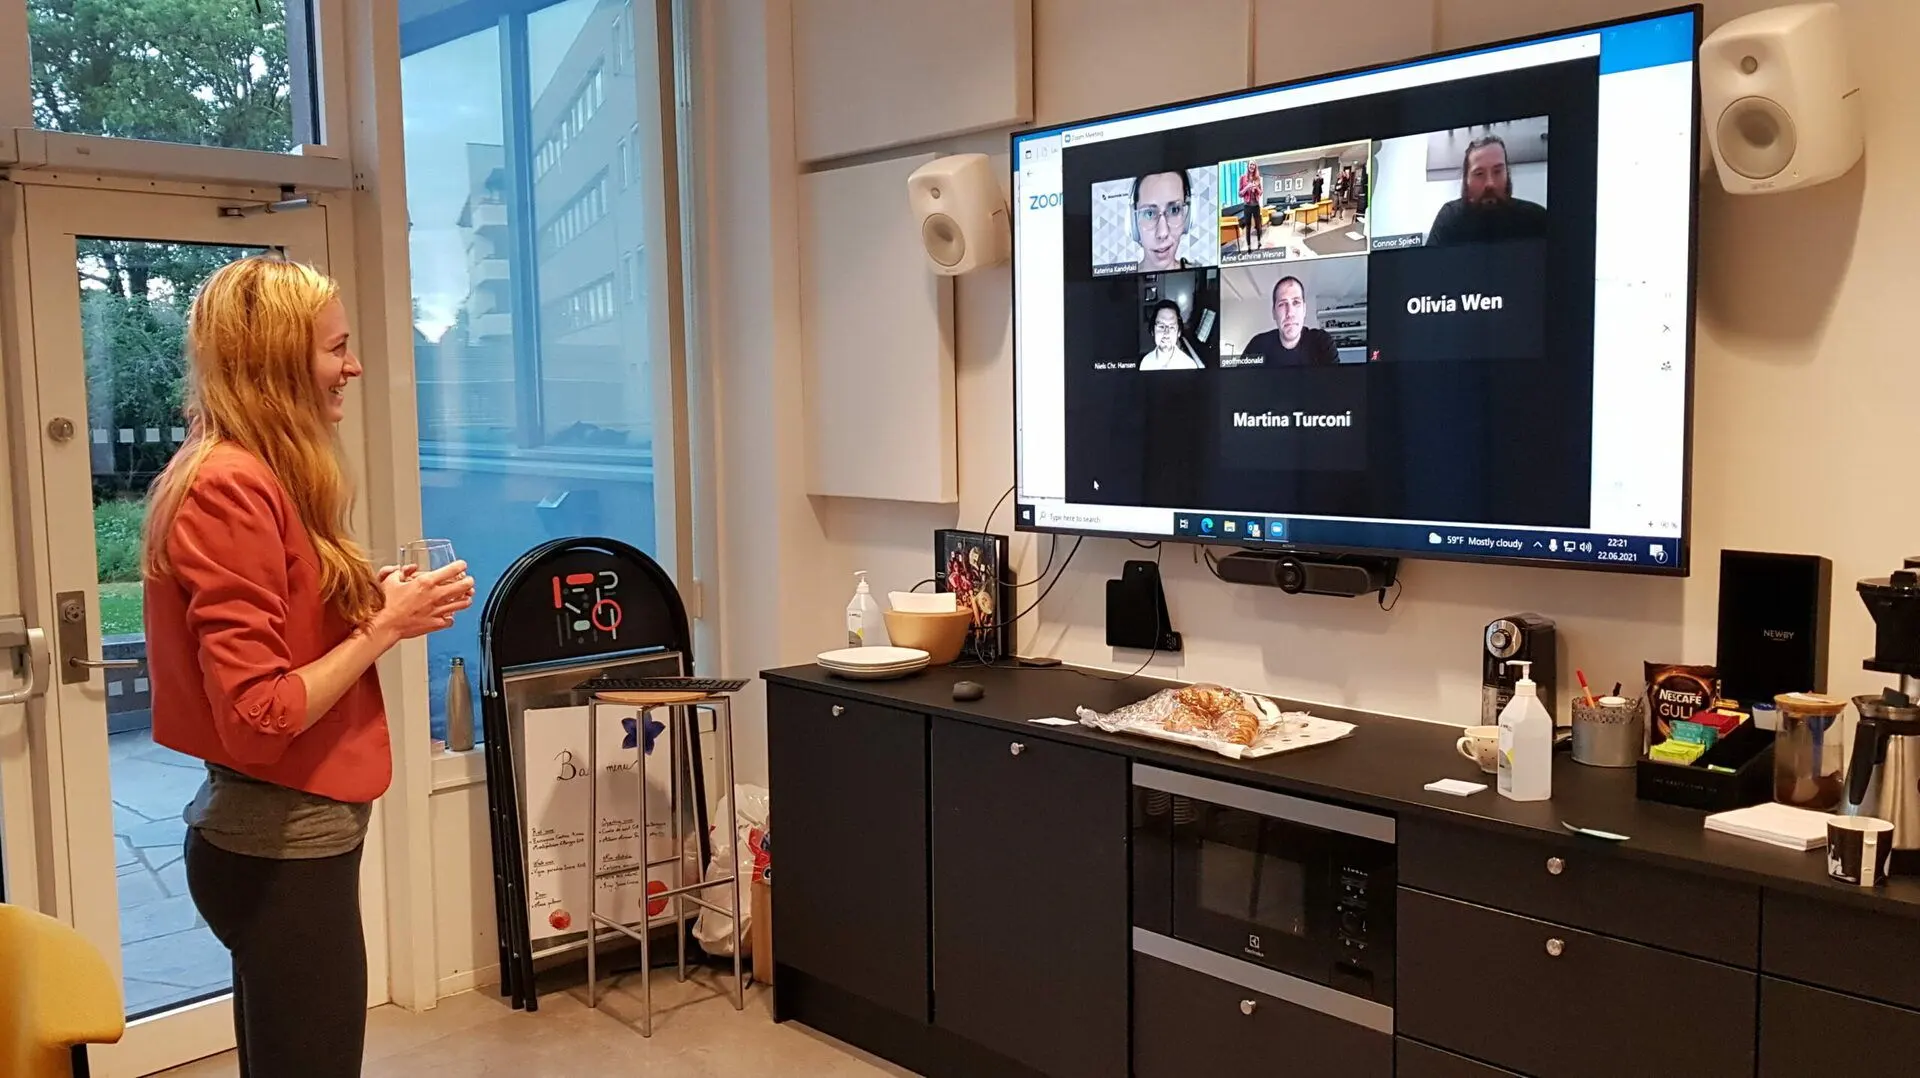 RITMO PhD fellow Dana Swarbrick interacts with some of the online RPPW participants in the physical-virtual Coffee Room. Croissants were only available for on-site participants&hellip;